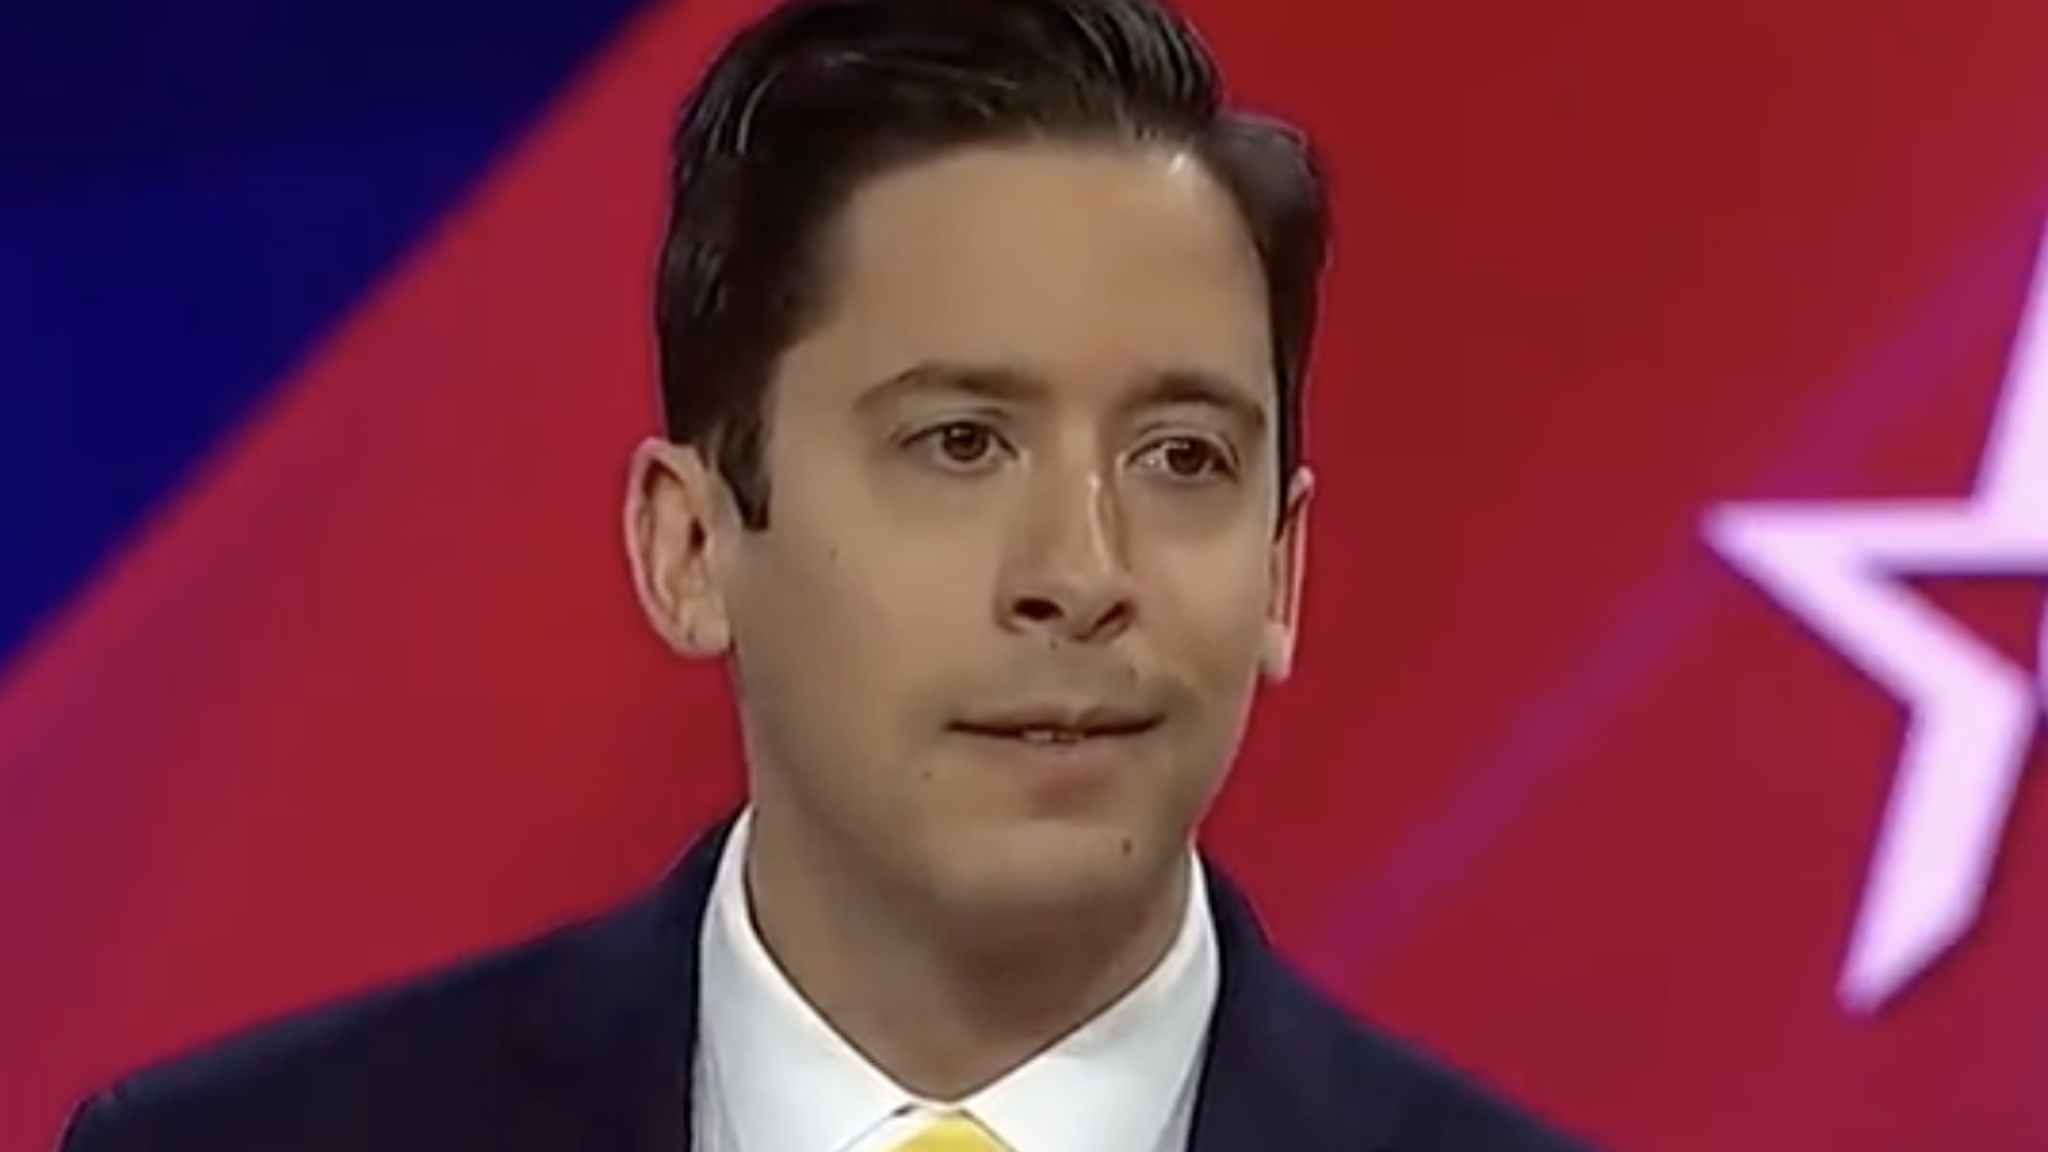 Michael Knowles told a crowd at the conservative event that men simply cannot become women, and women cannot become men, adding that society must help gender dysphoric people